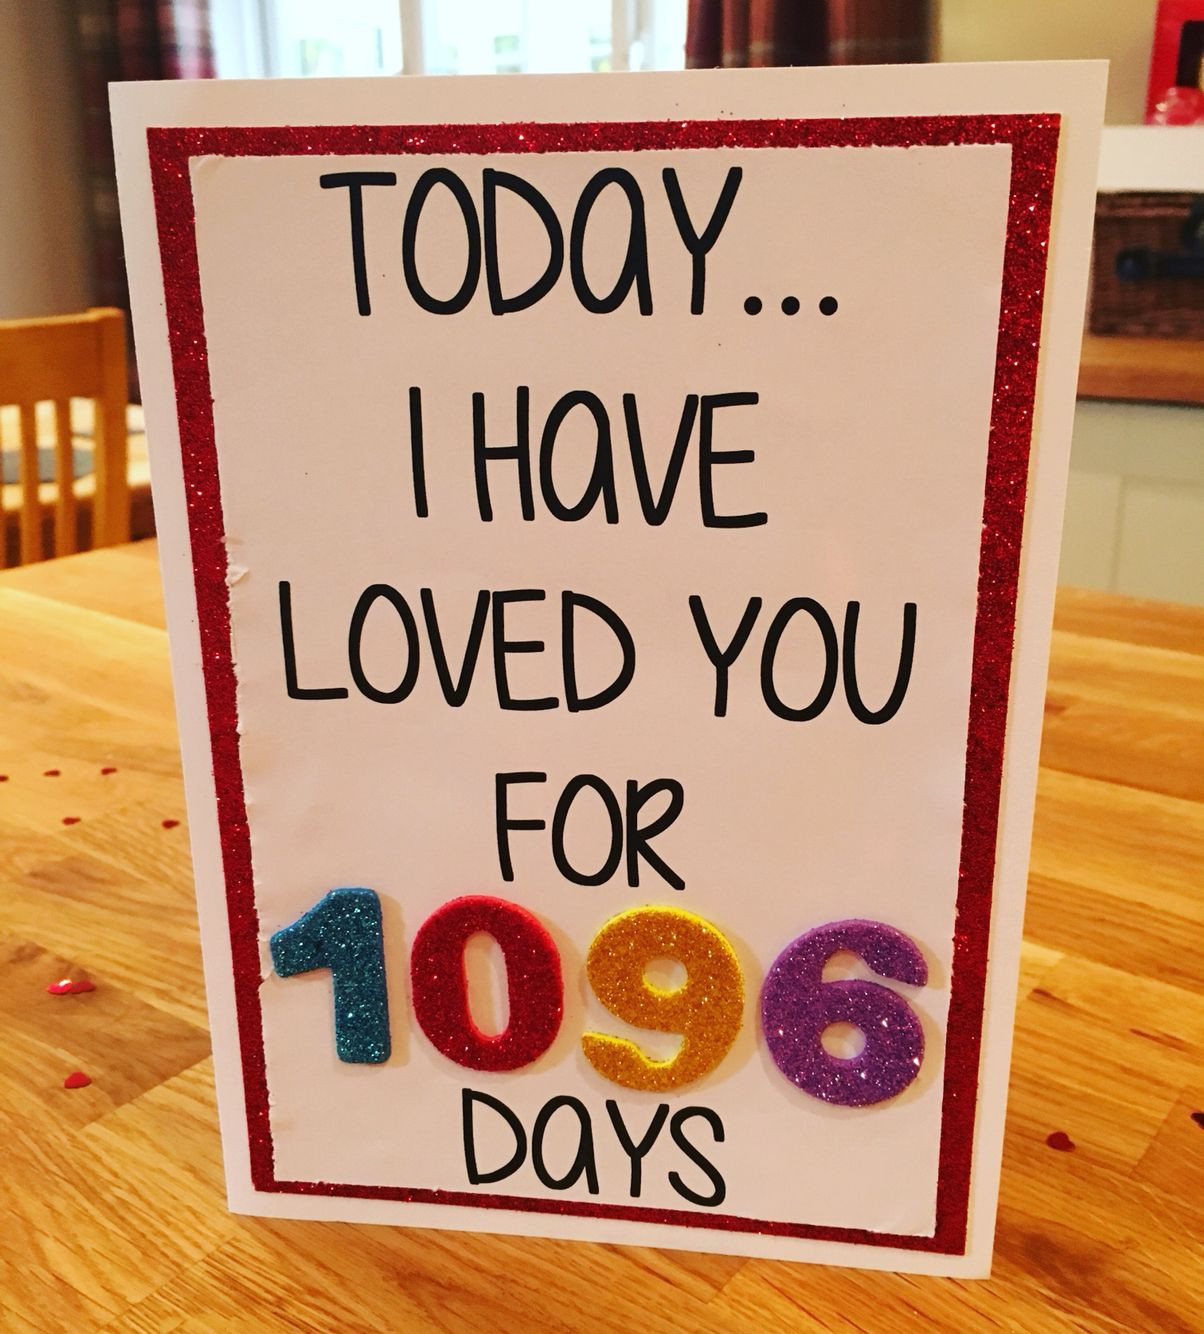 3 Year Anniversary Gift Ideas For Wife
 3 year anniversary card Today I have loved you for 1096